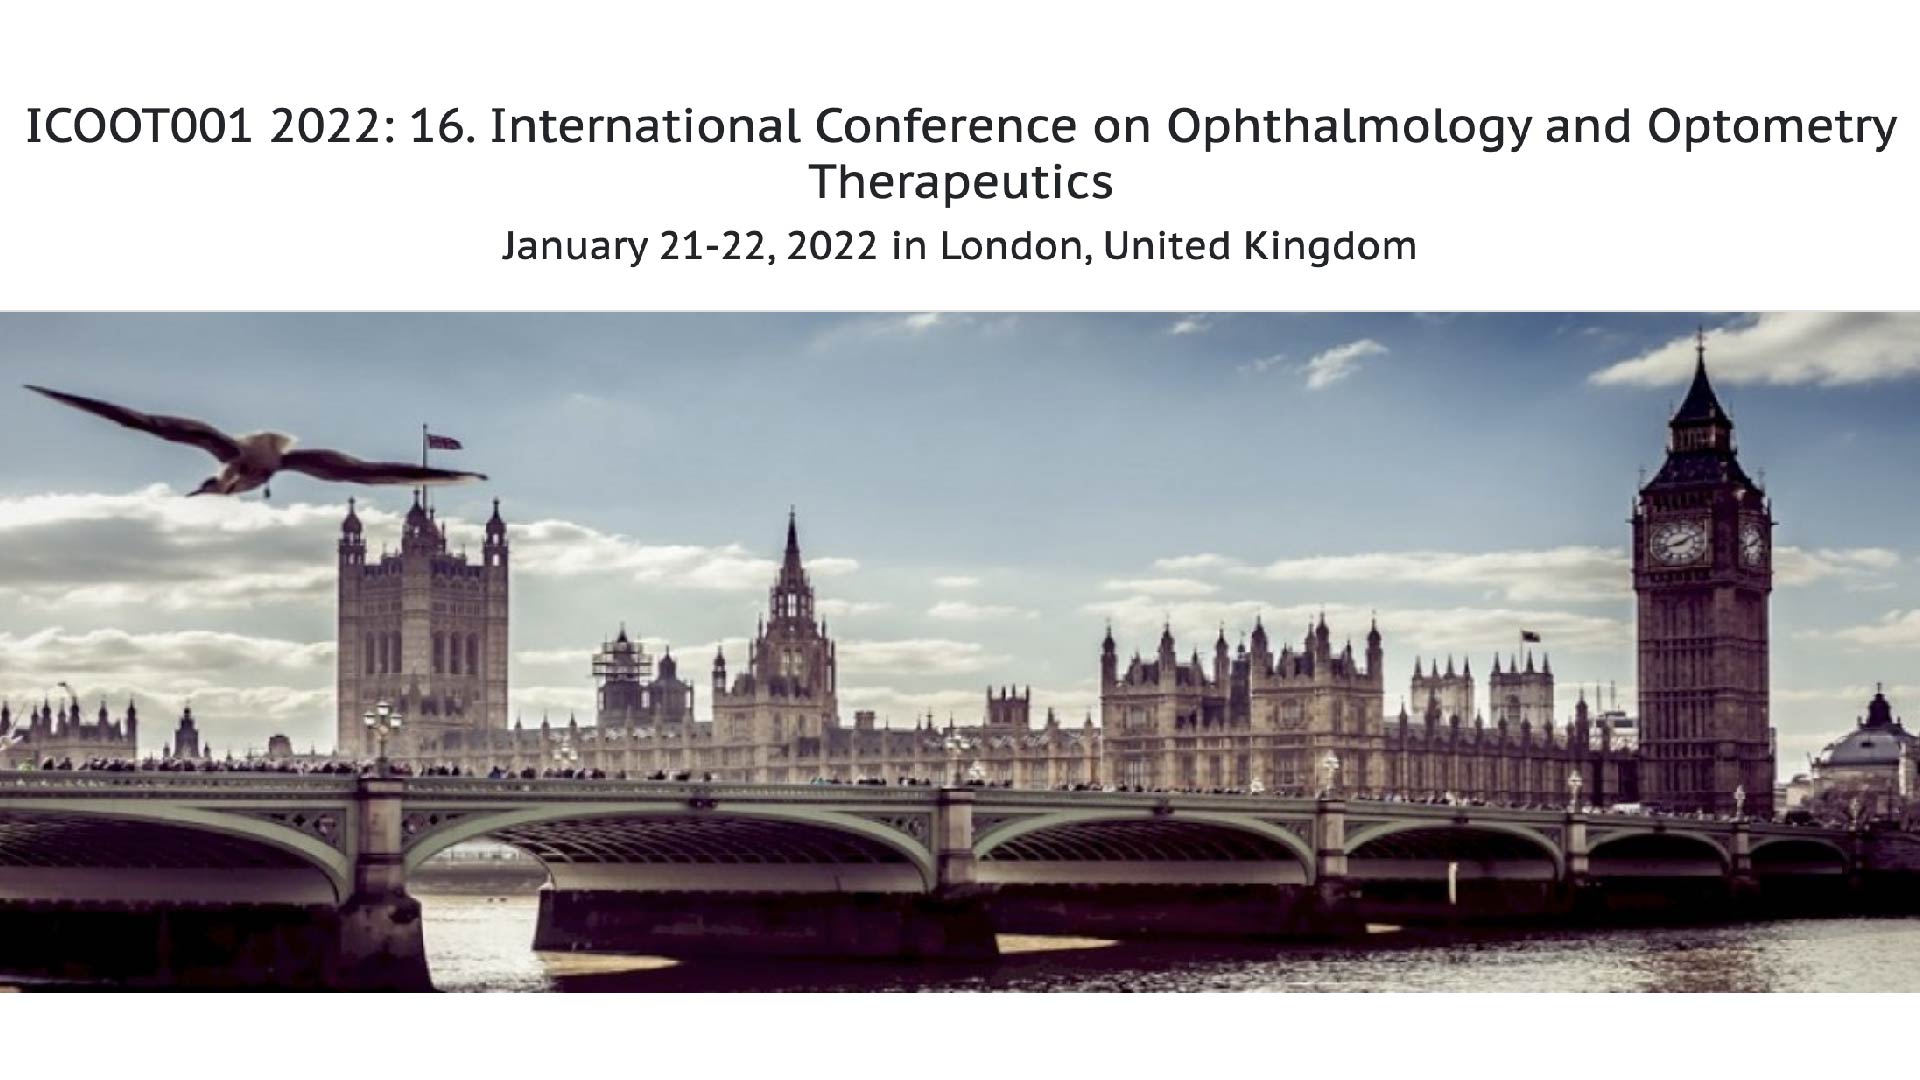 International Conference on Ophthalmology and Optometry Therapeutics 2022